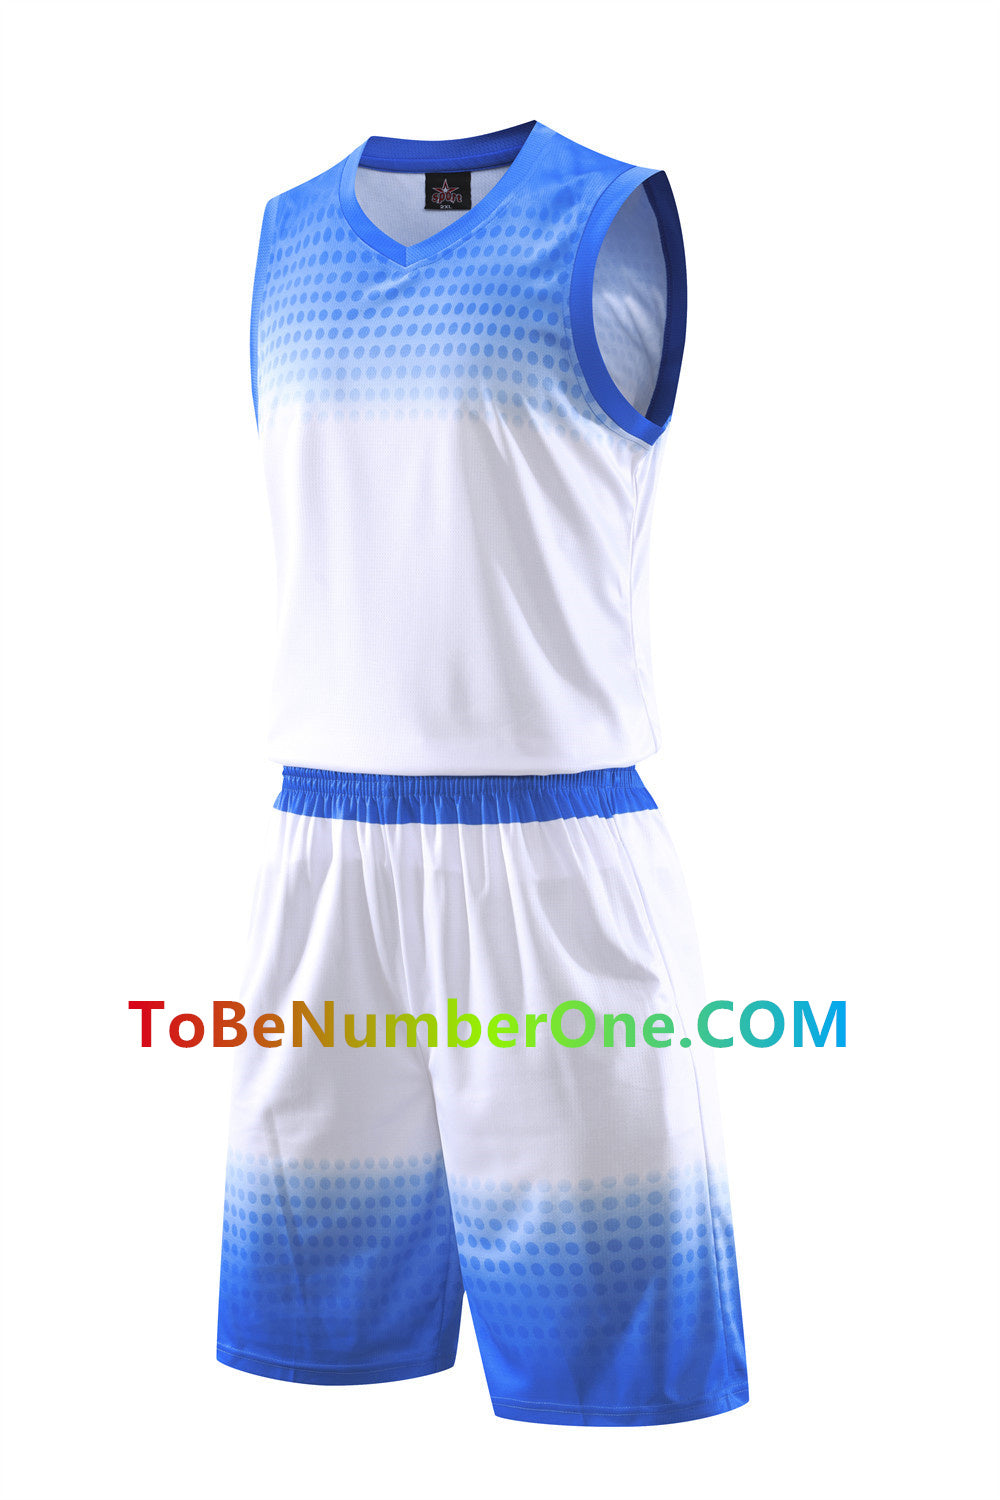 Customize instock High Quality Quick-drying basketball uniforms print with team name , player and number.  jerseys&shorts with pocket A108#